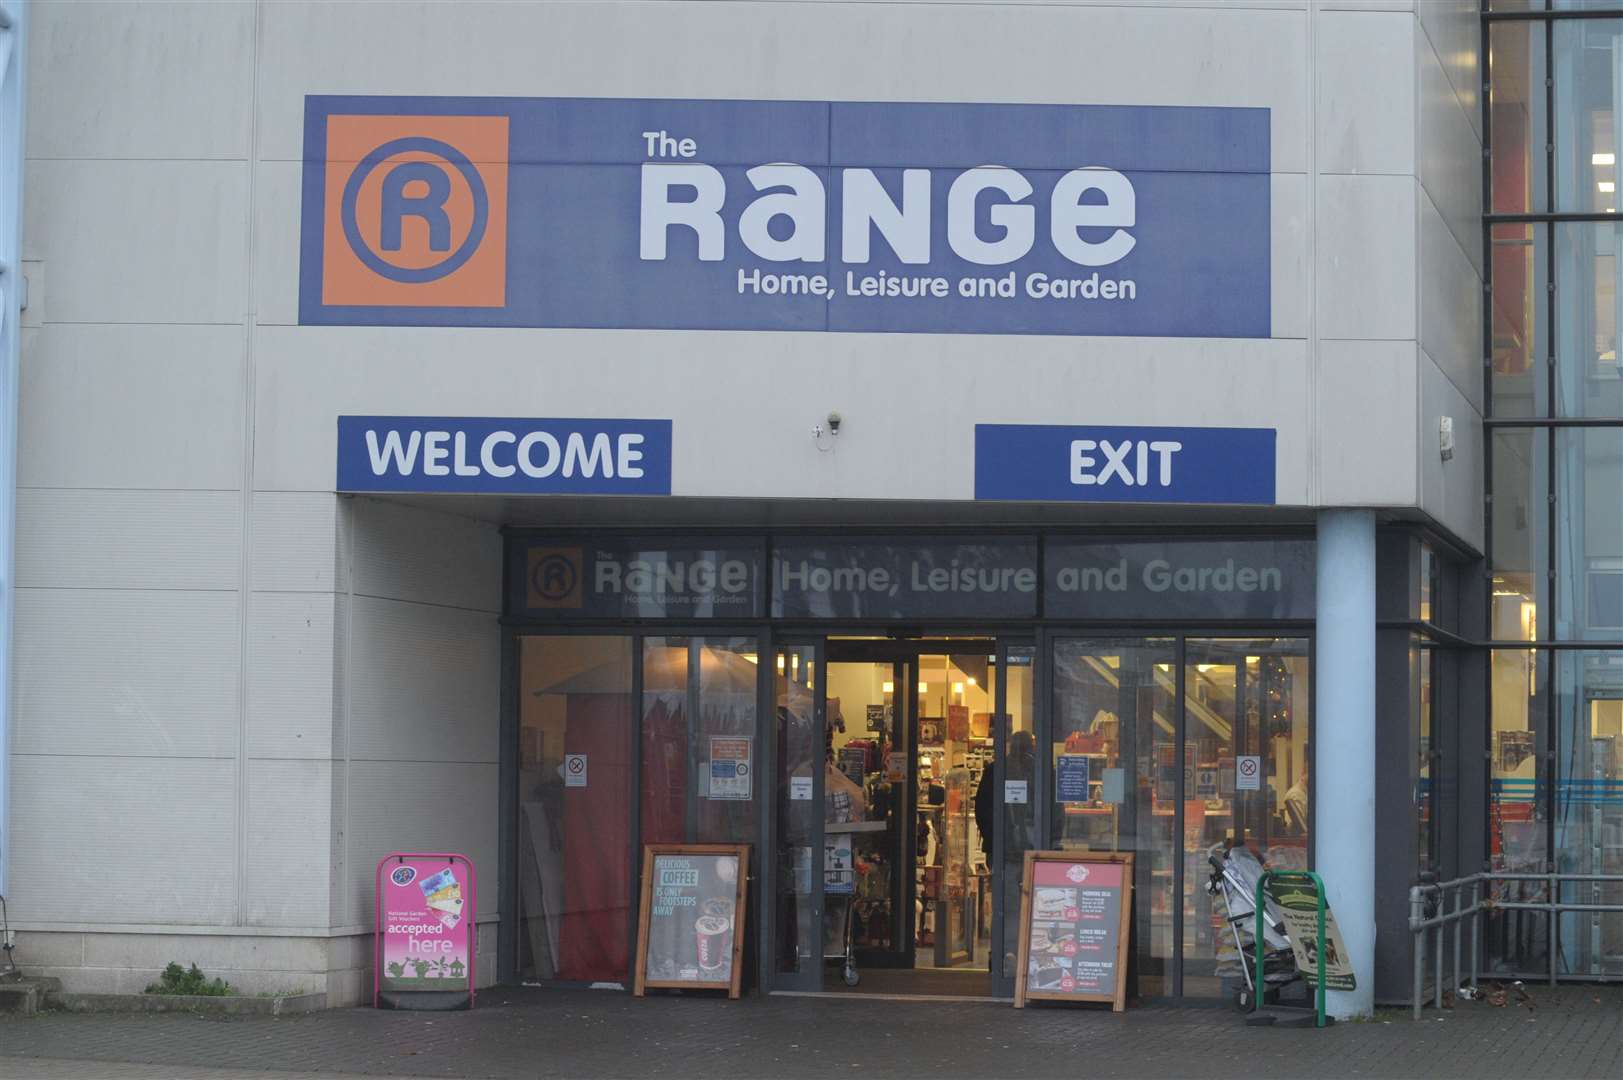 The Range store at Chatham is set for a revamp